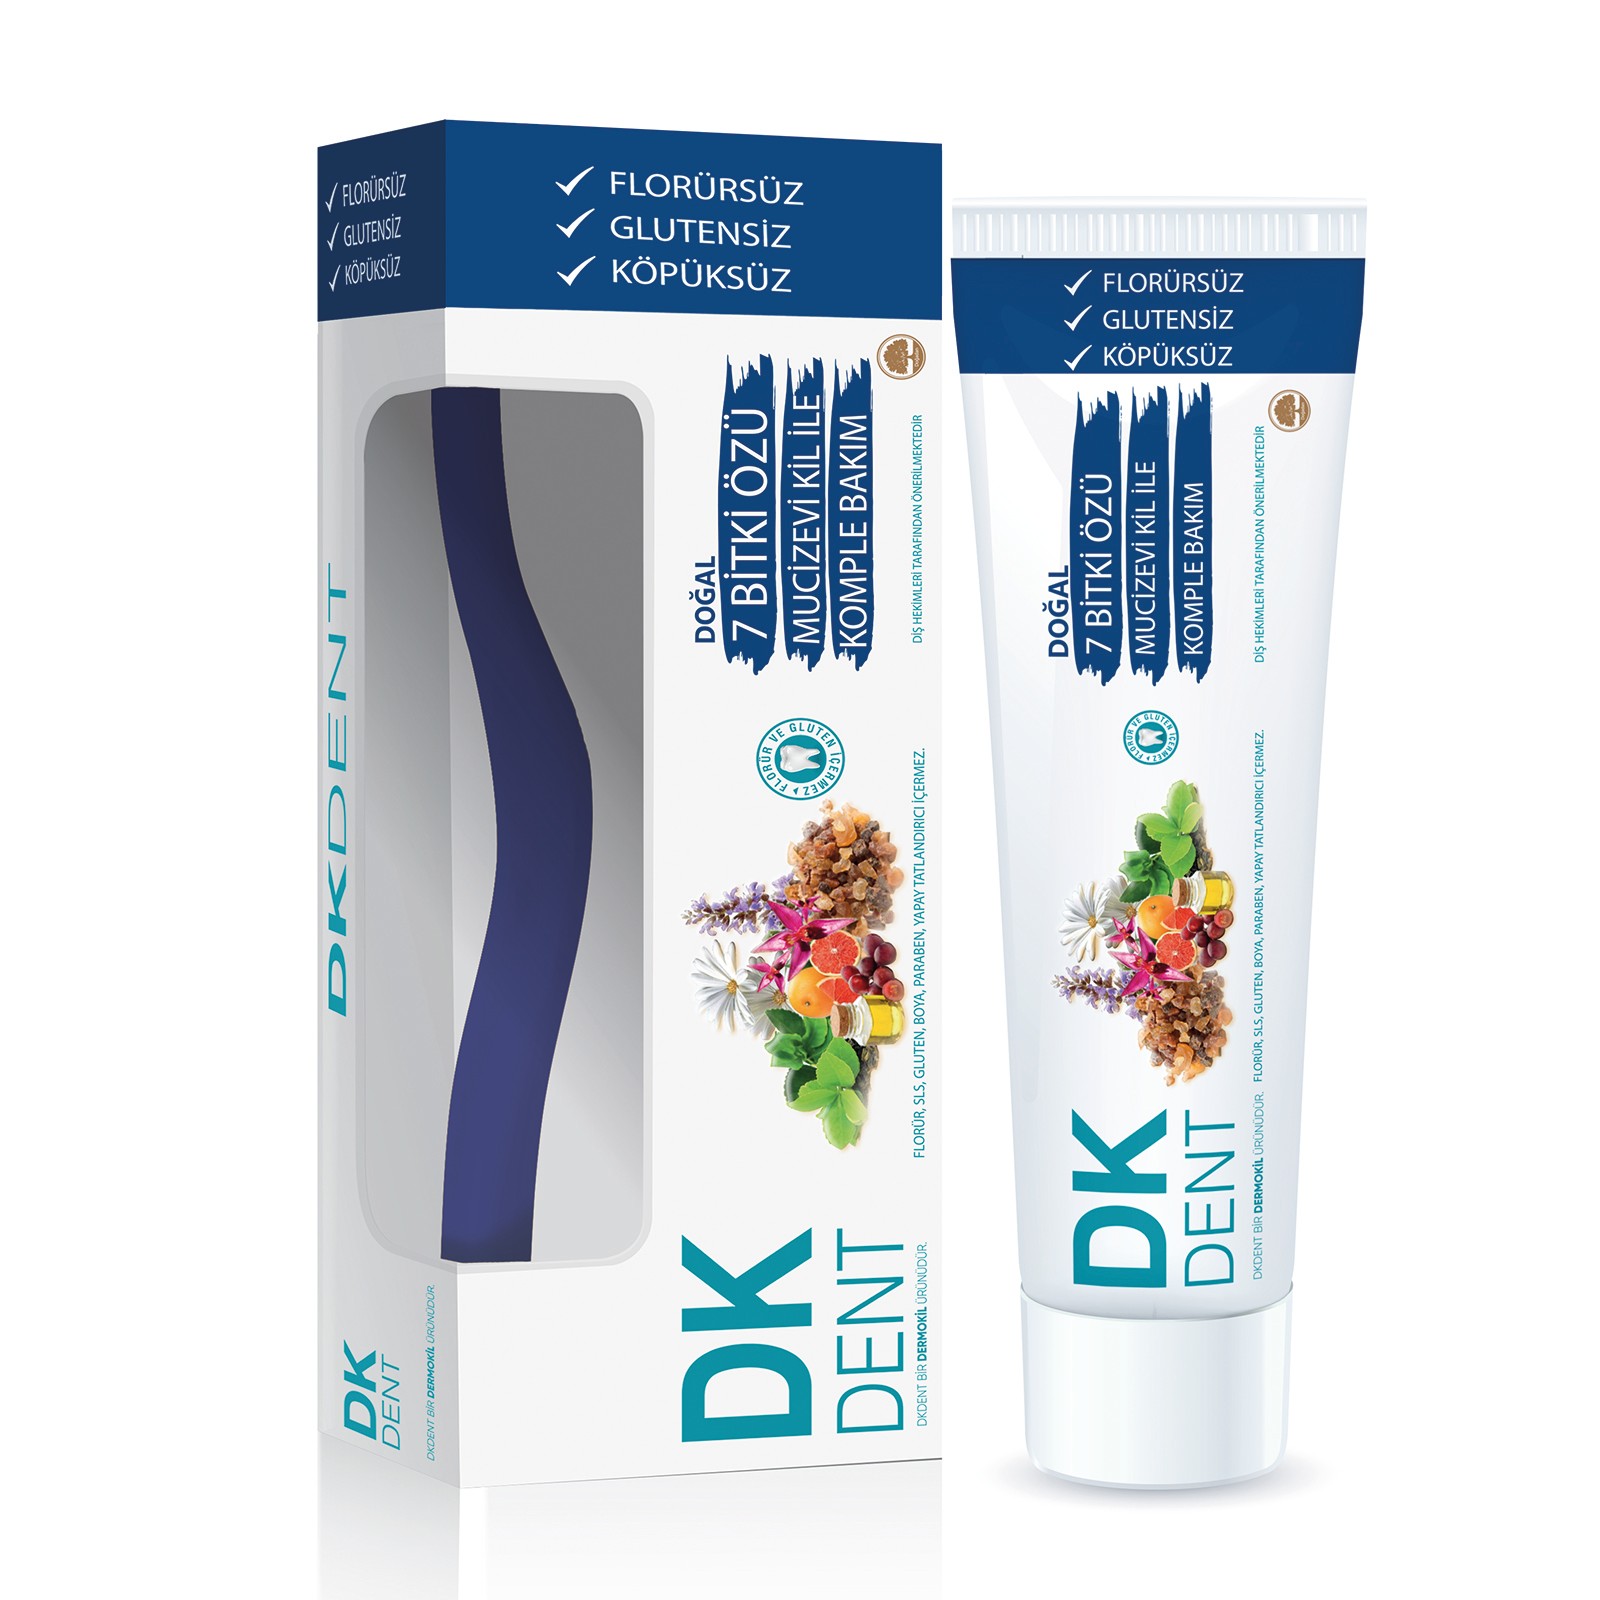 DKDENT 7 PLANT EXCHANGE TENT PASTE 75 ML Toothbrush Gift